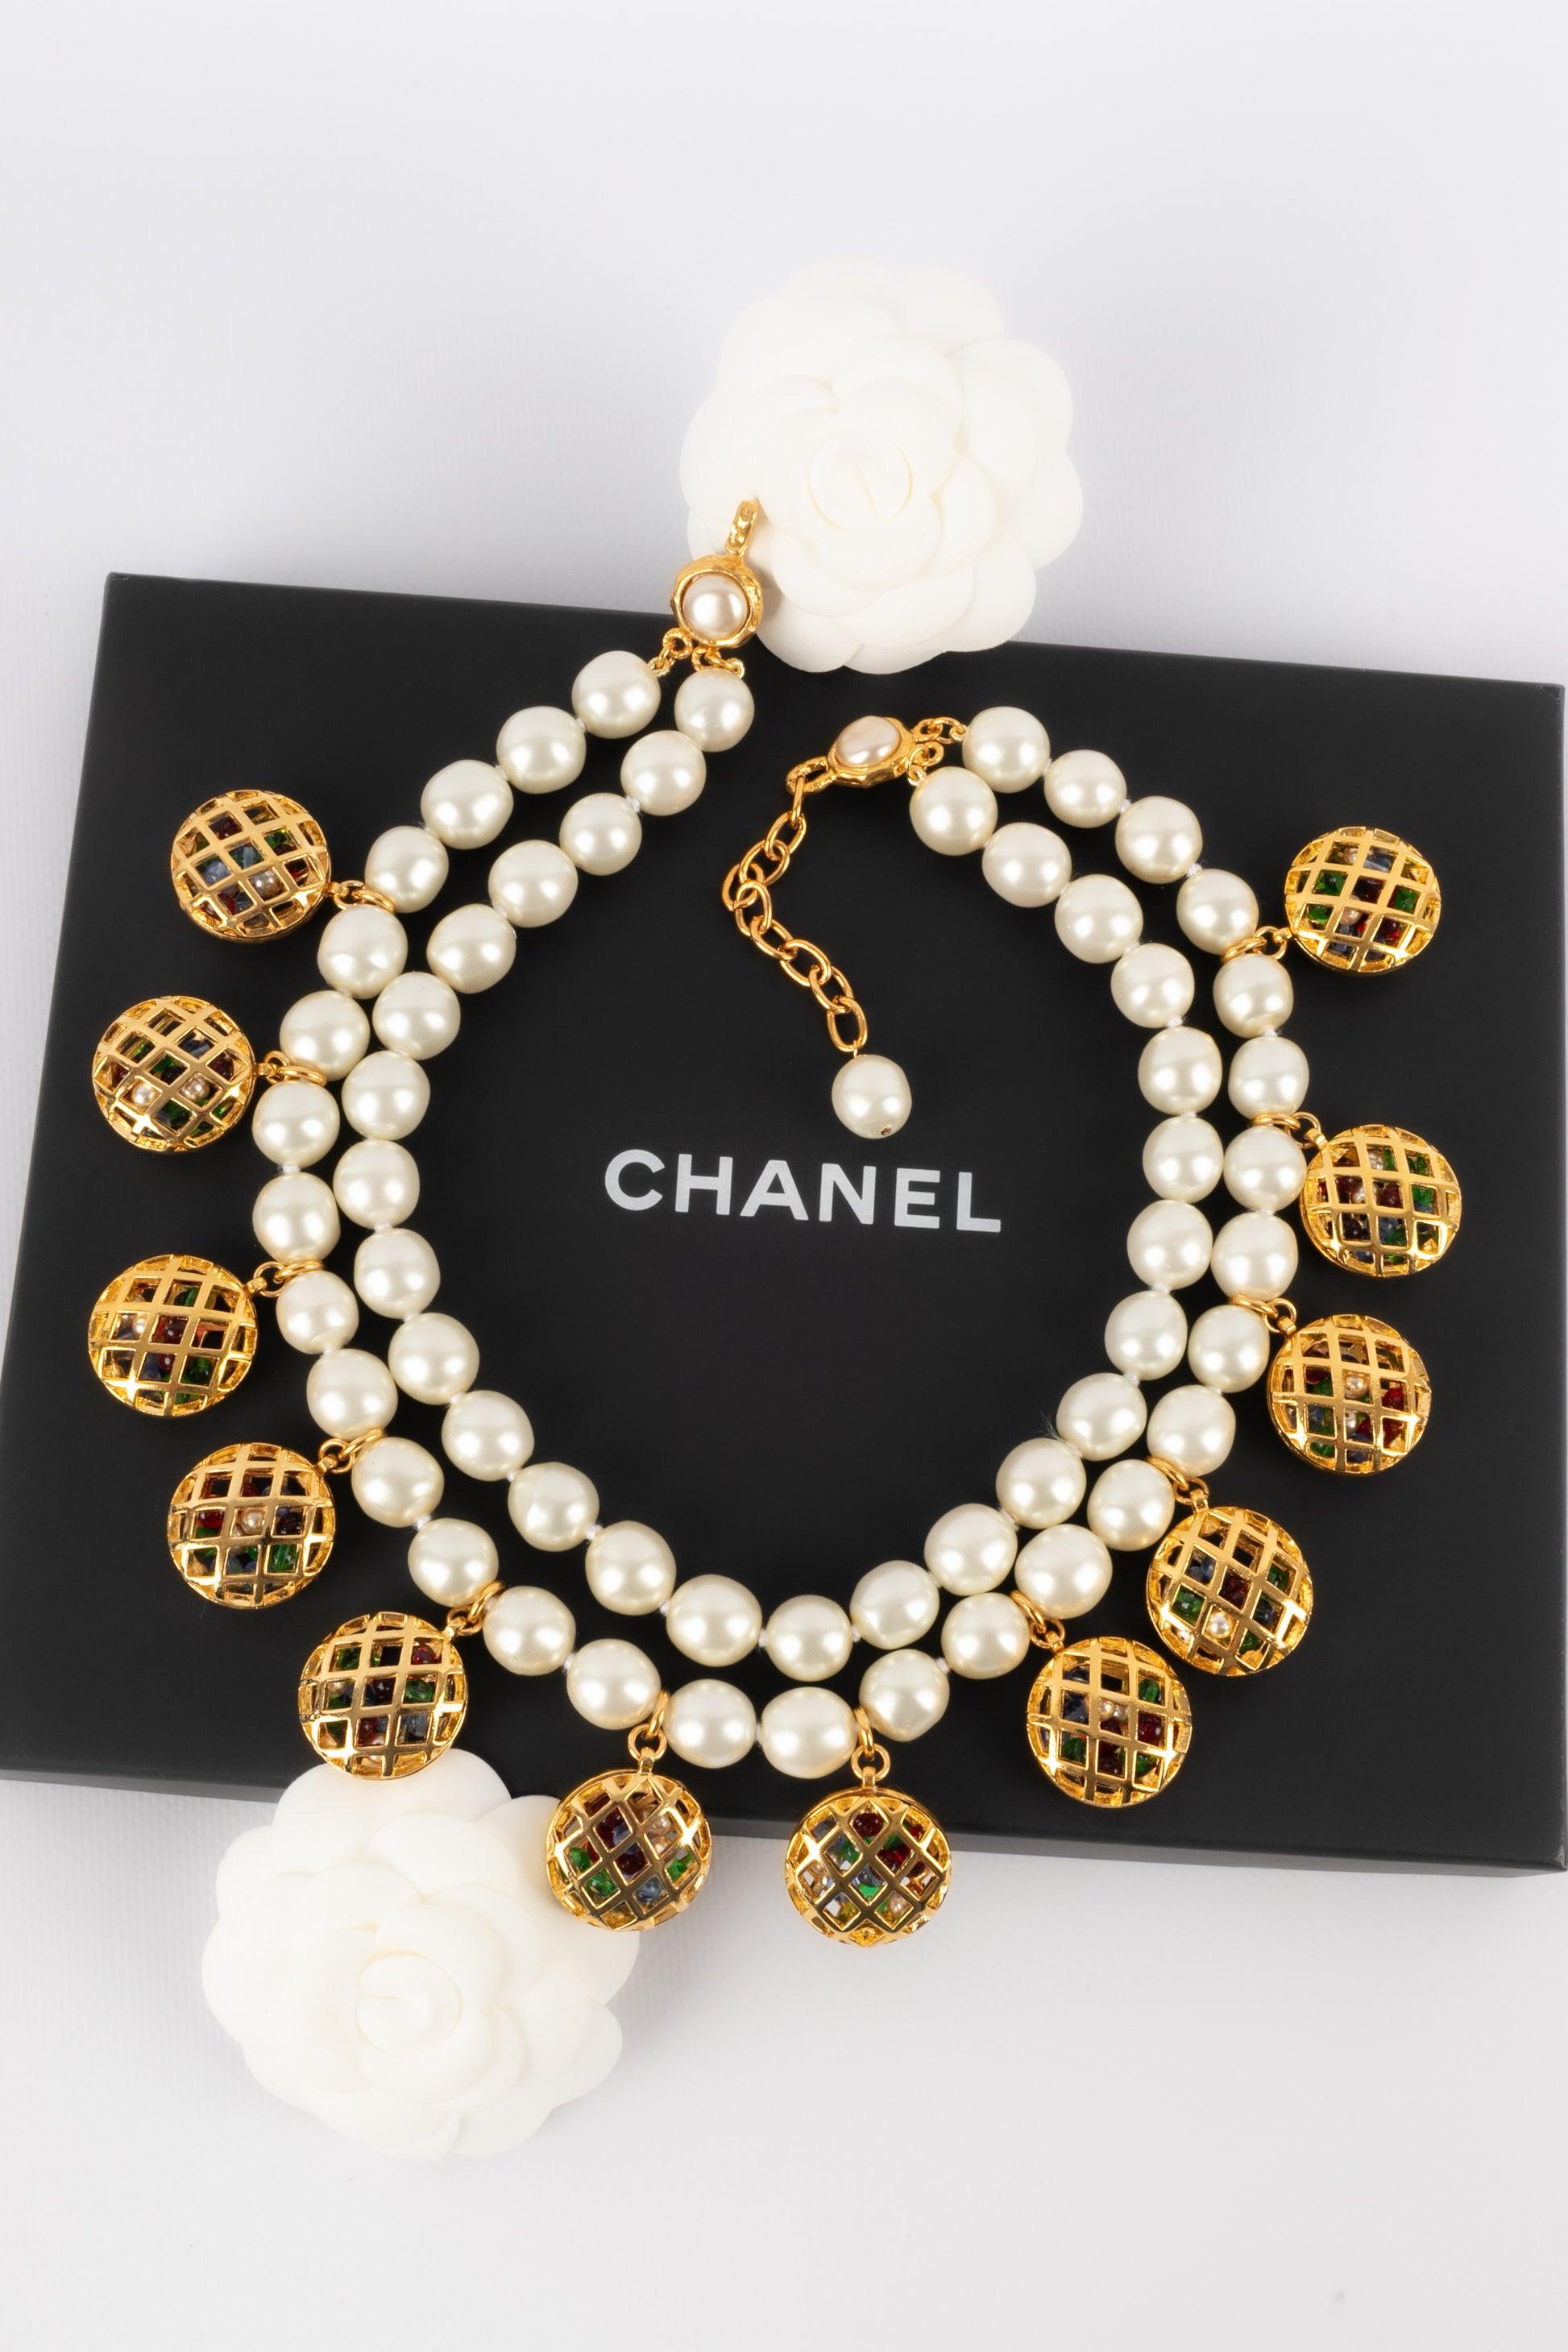 Chanel - (Made in France) Two-row costume pearl necklace with openwork golden metal charms holding multicolored glass paste pearls.

Additional information: 
Condition: Very good condition
Dimensions: Length: from 47 cm to 52 cm
 
Seller Reference: